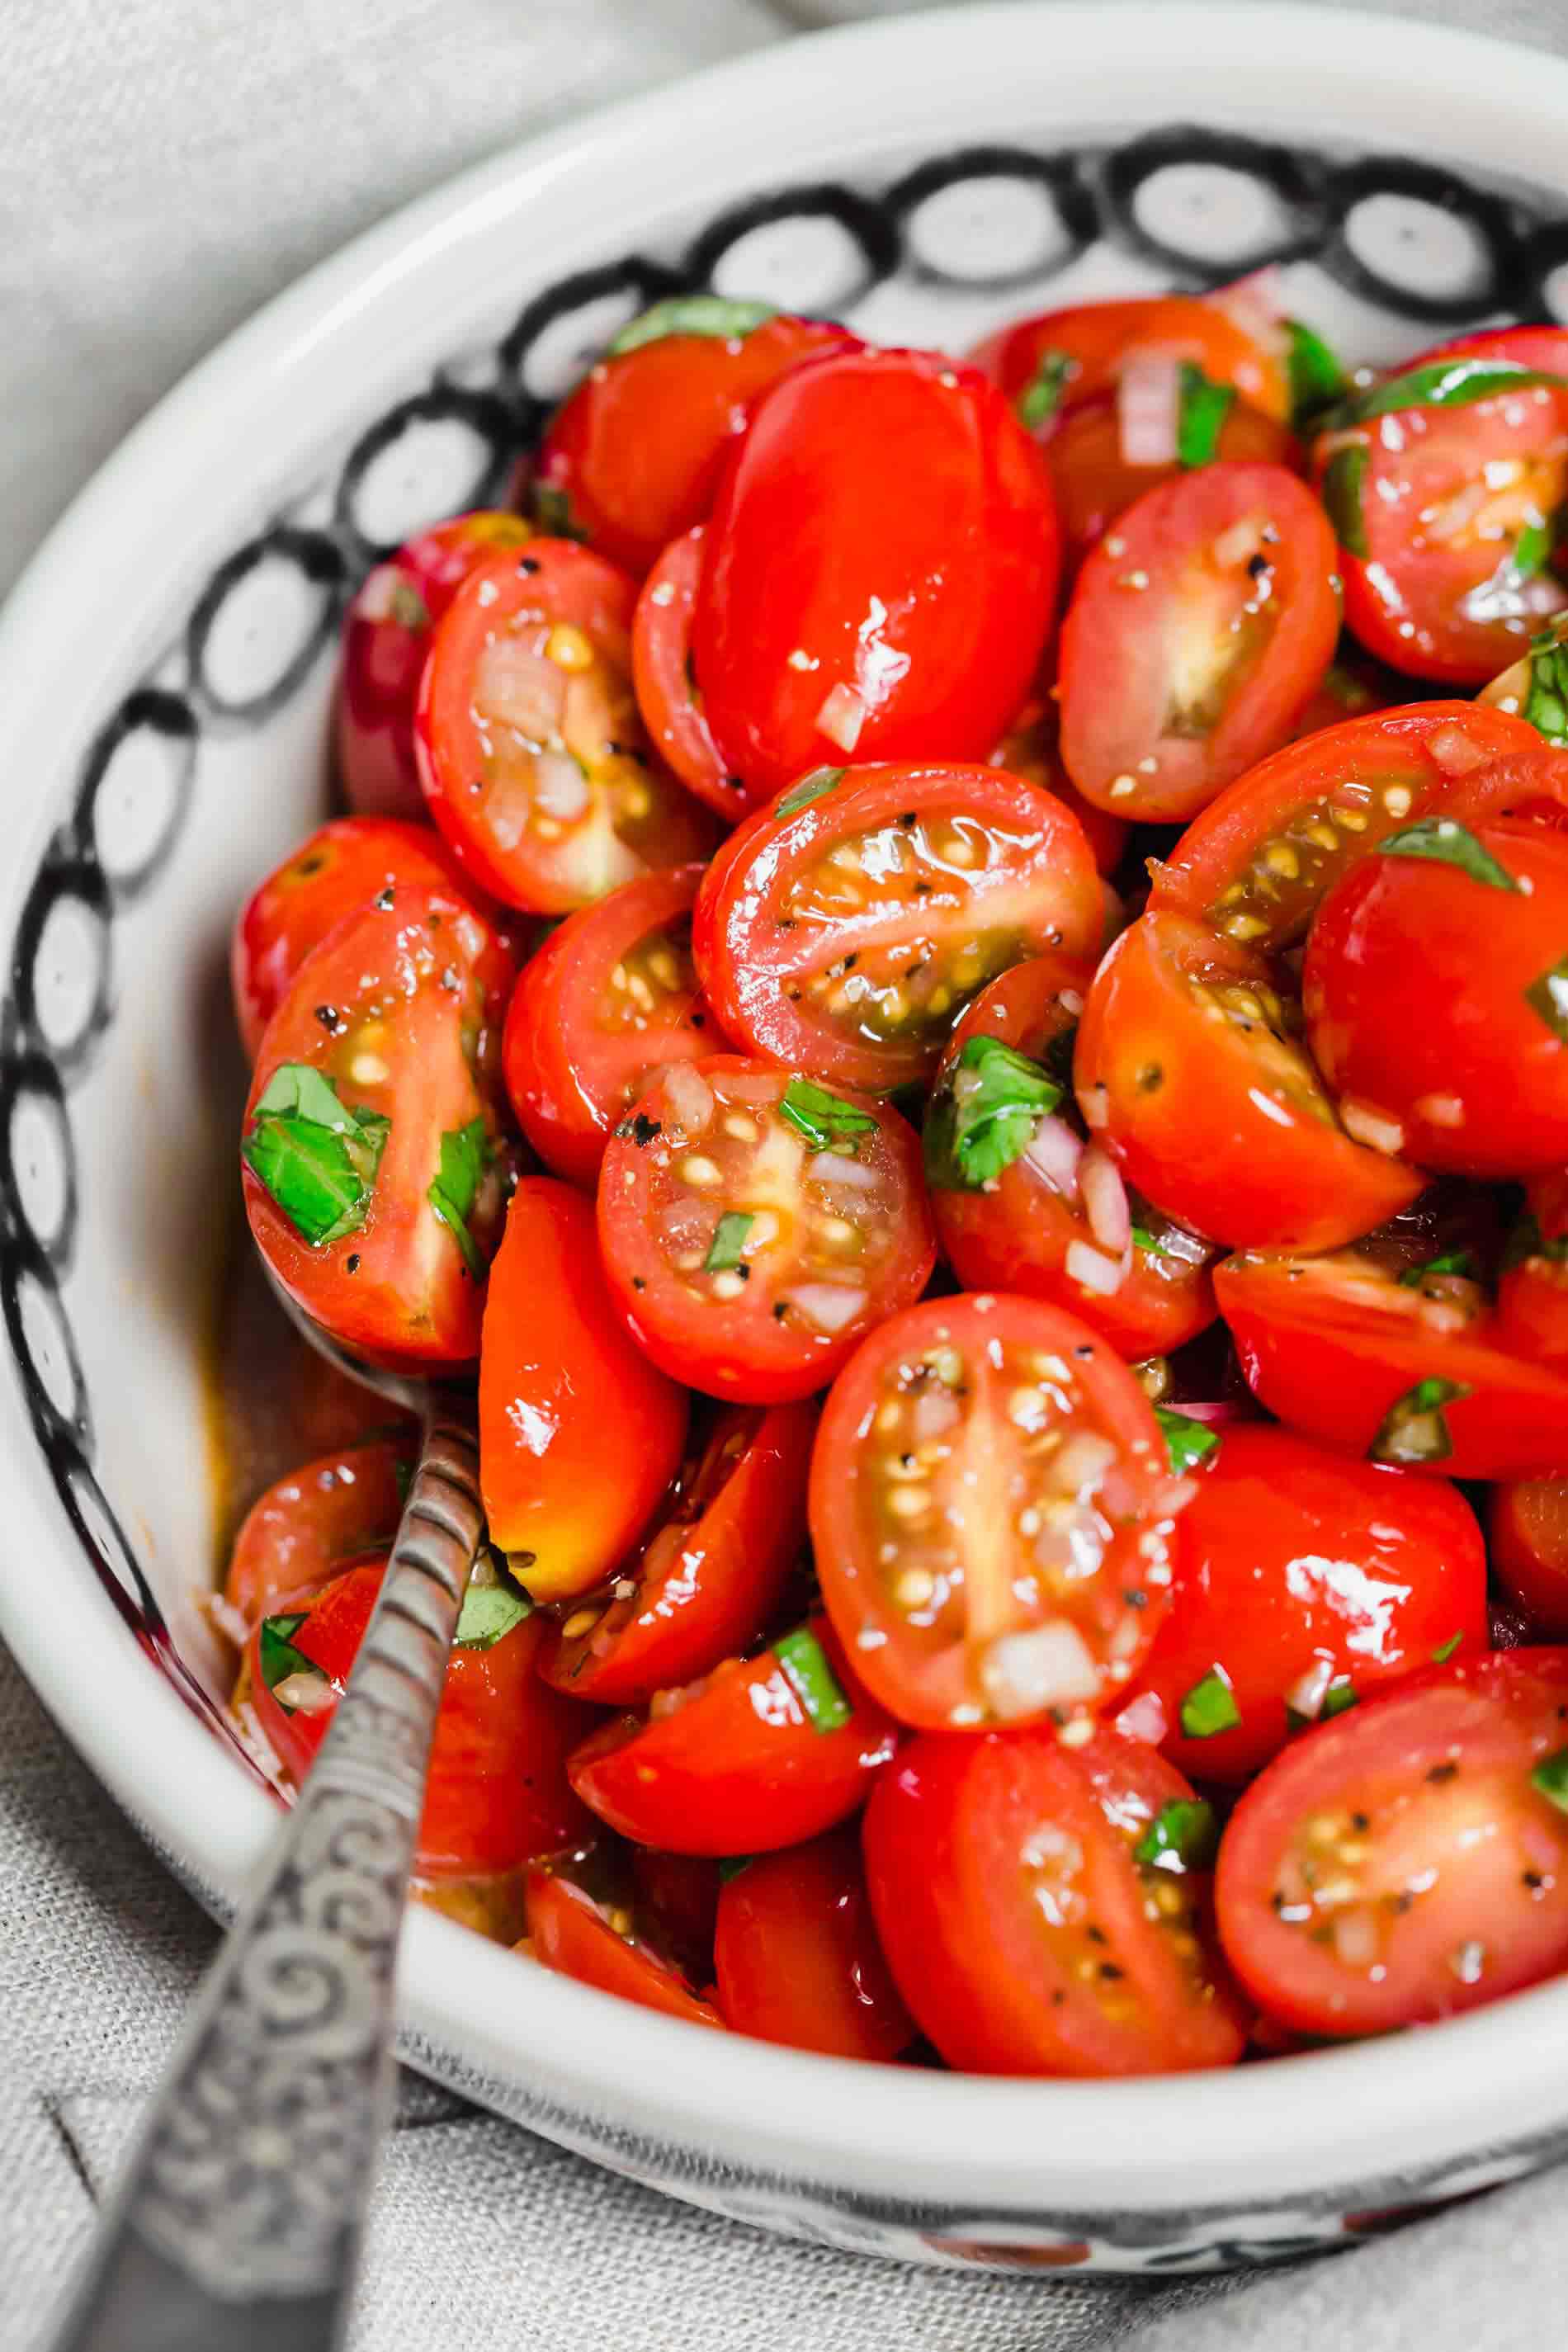 Delicious tomato Salad Recipes – The Best Ideas for Recipe Collections